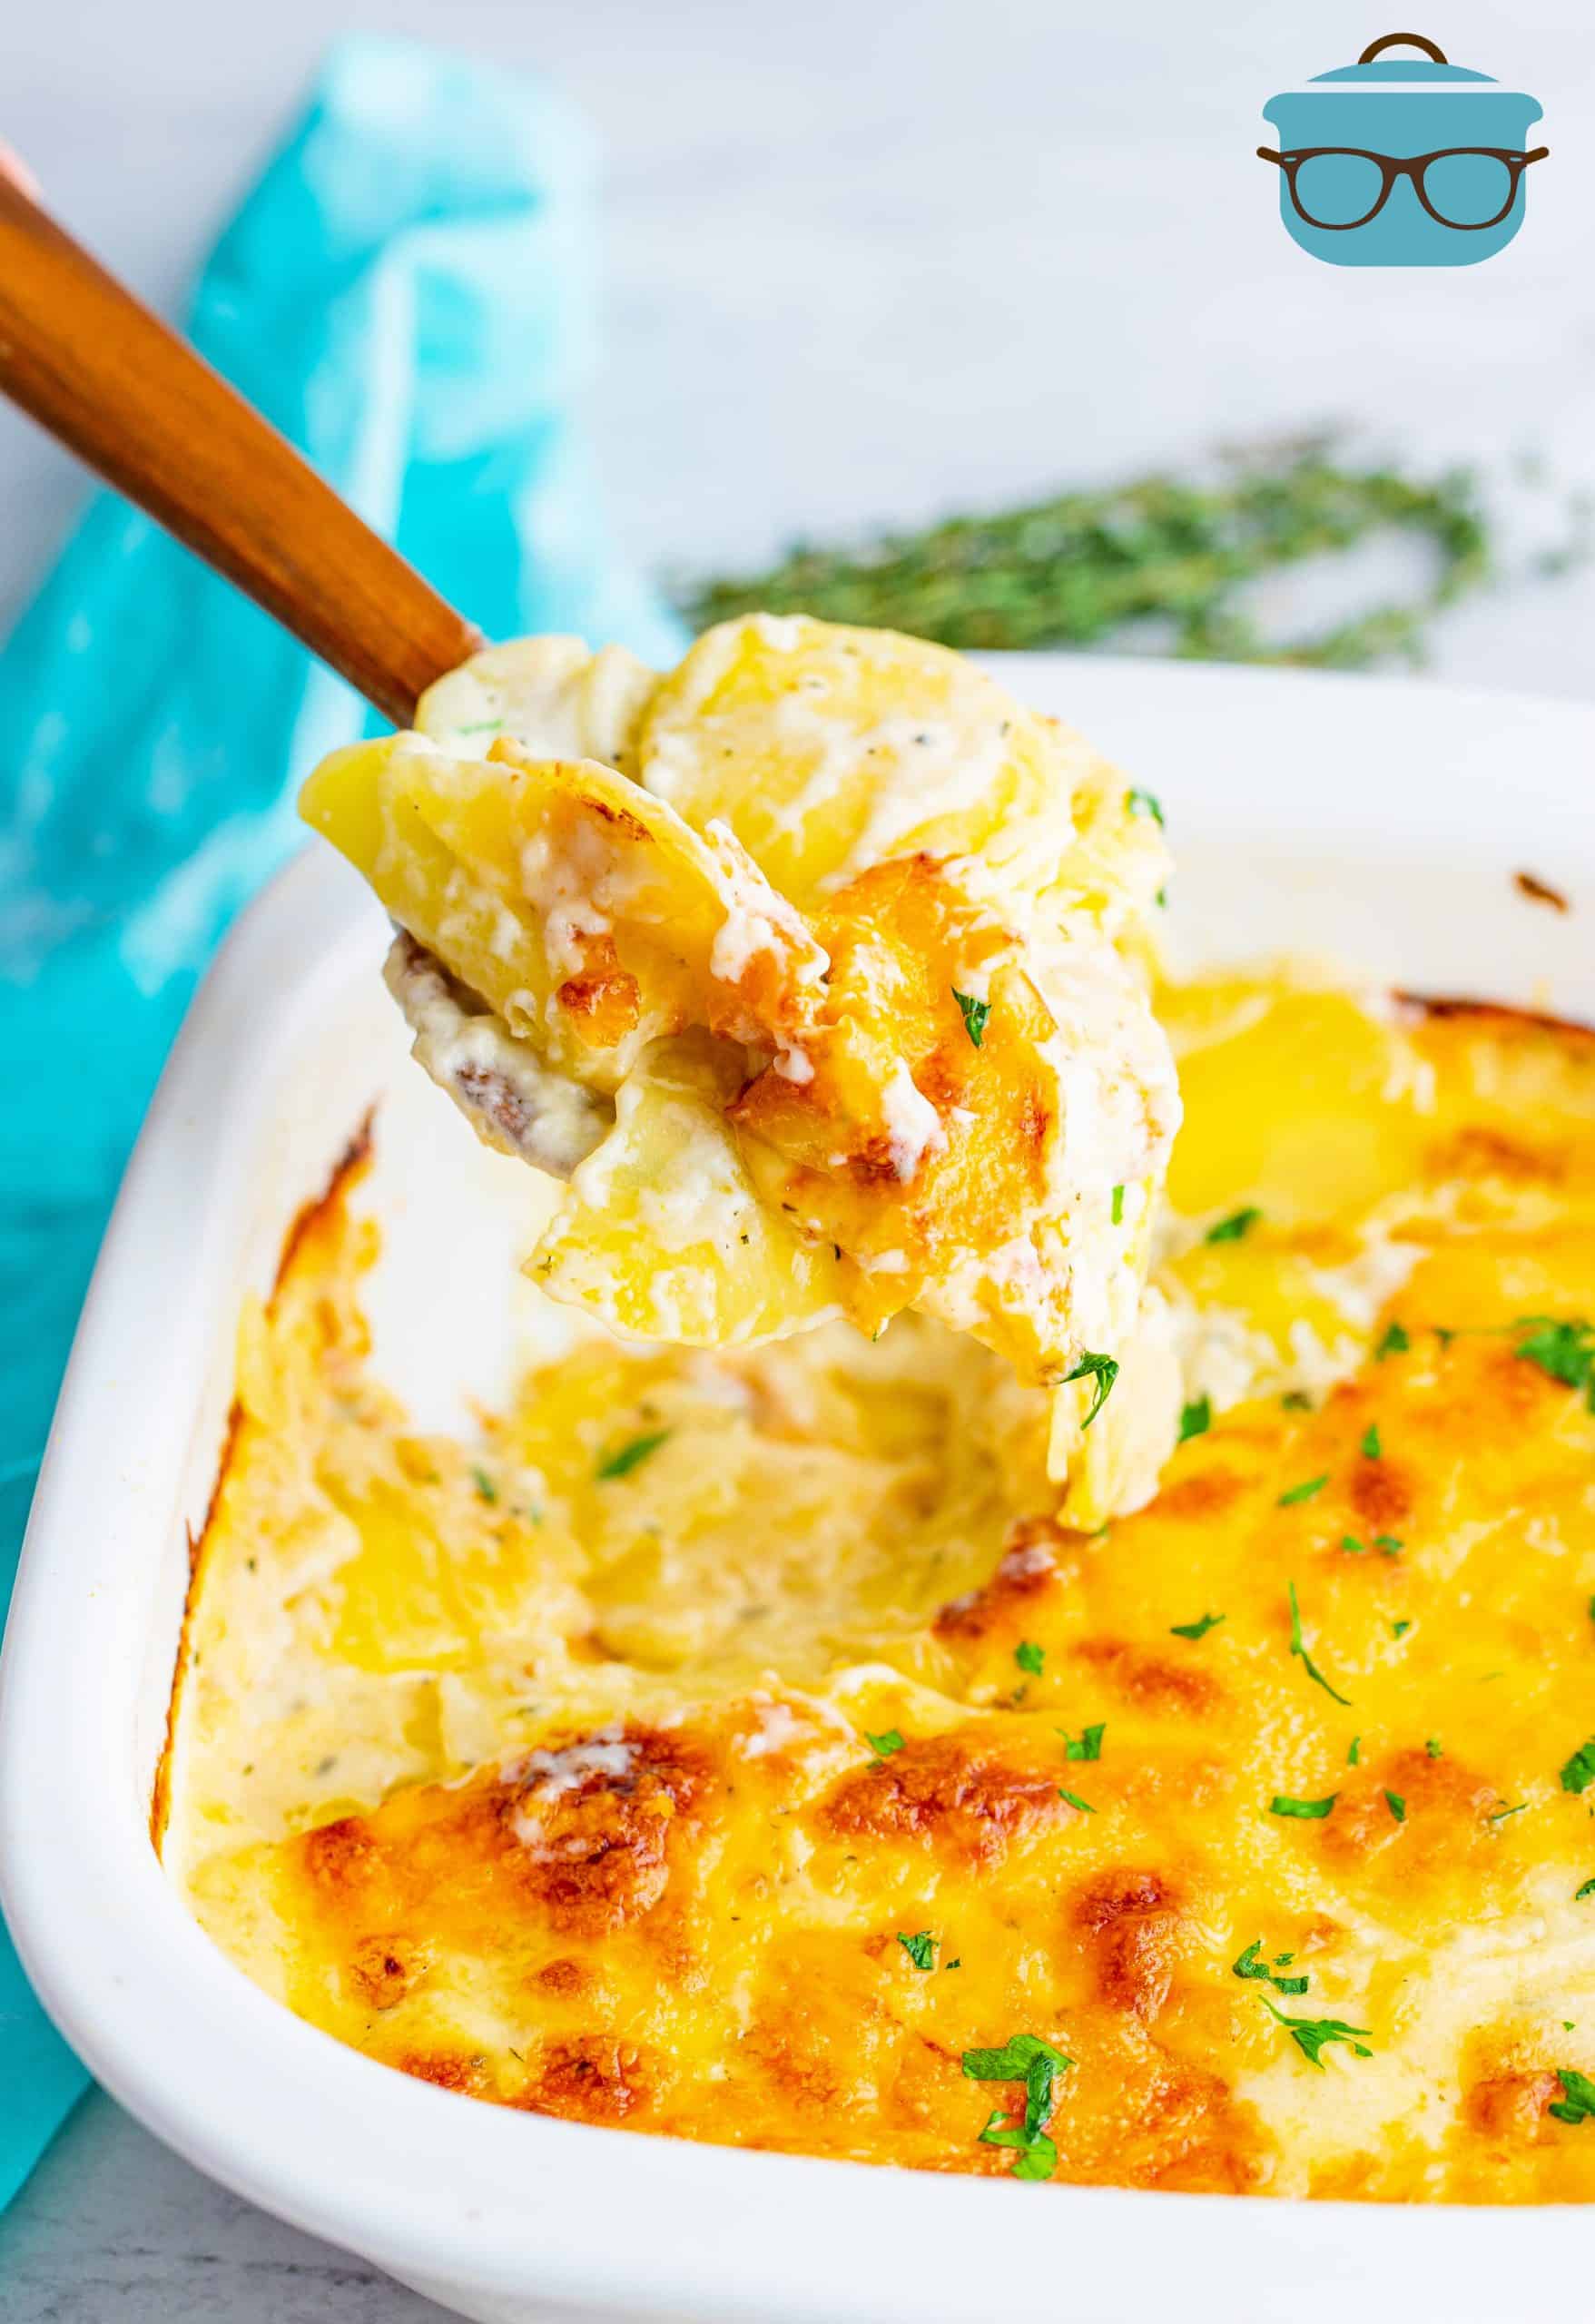 Cheesy Scalloped Potatoes, fully baked, shown in a white baking dish with a wooden spoon scooping out some of the potatoes.